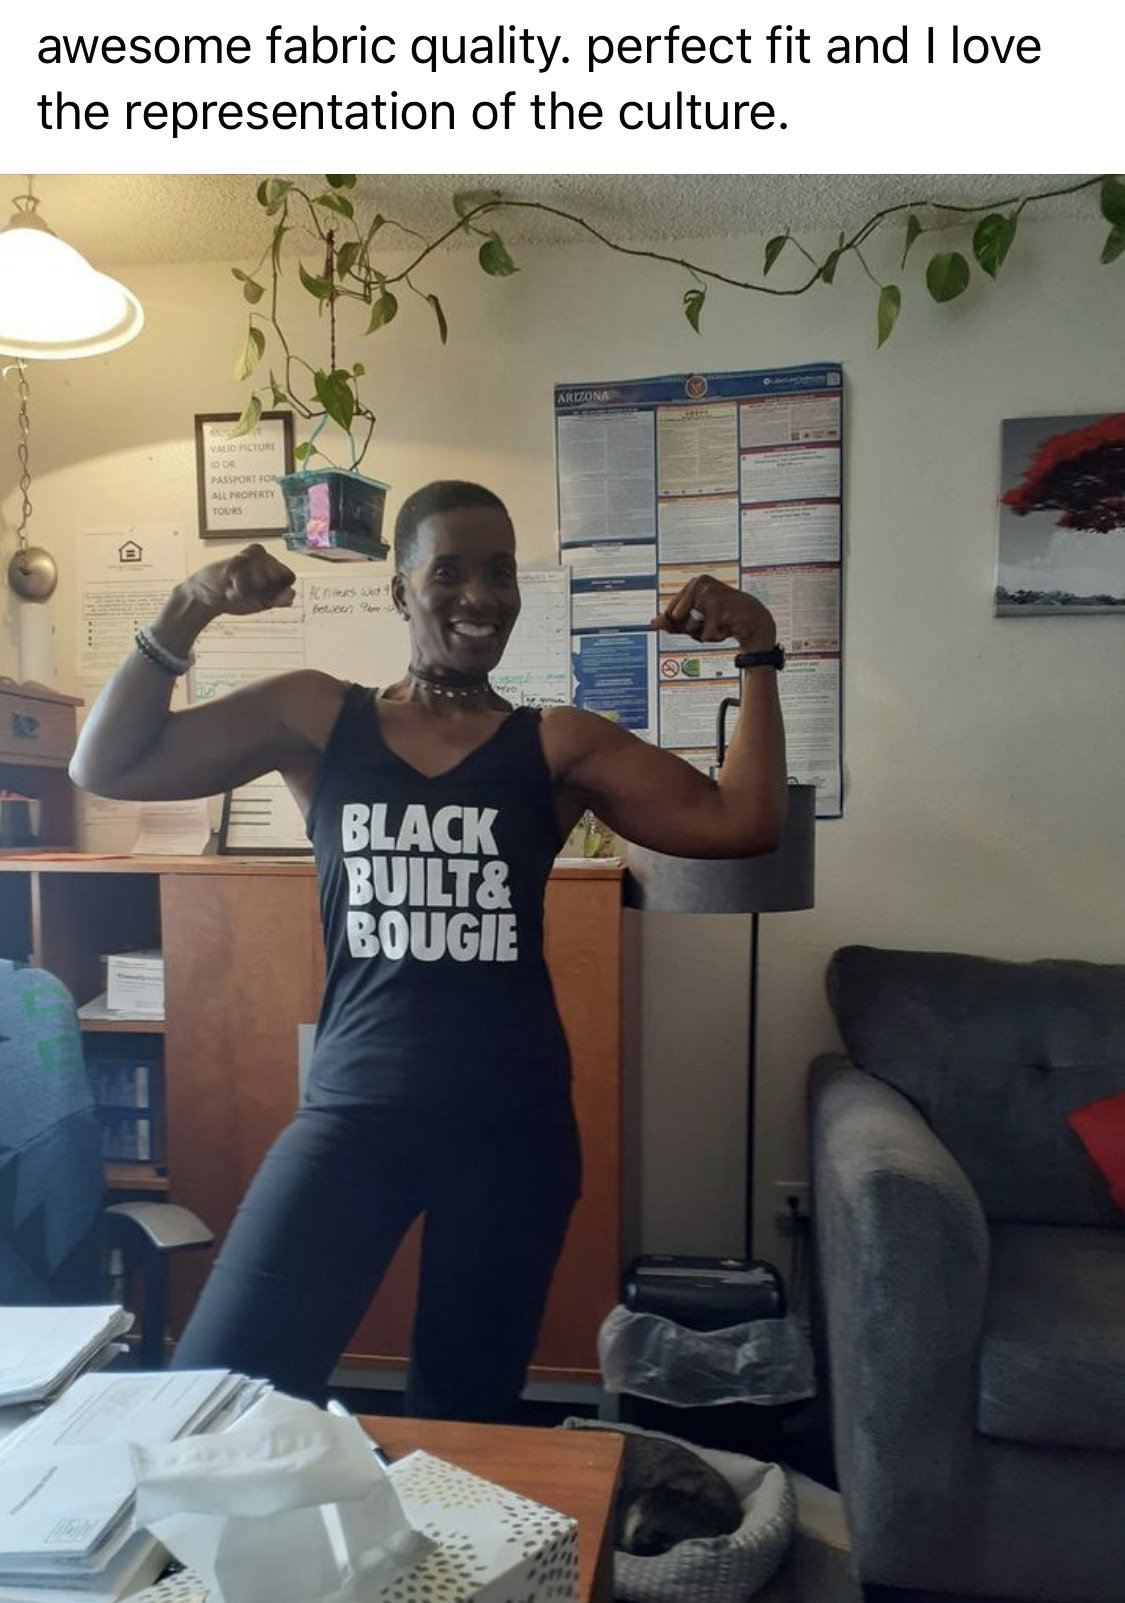 Black girl in Black Built Bougie tank top doing a double biceps pose 